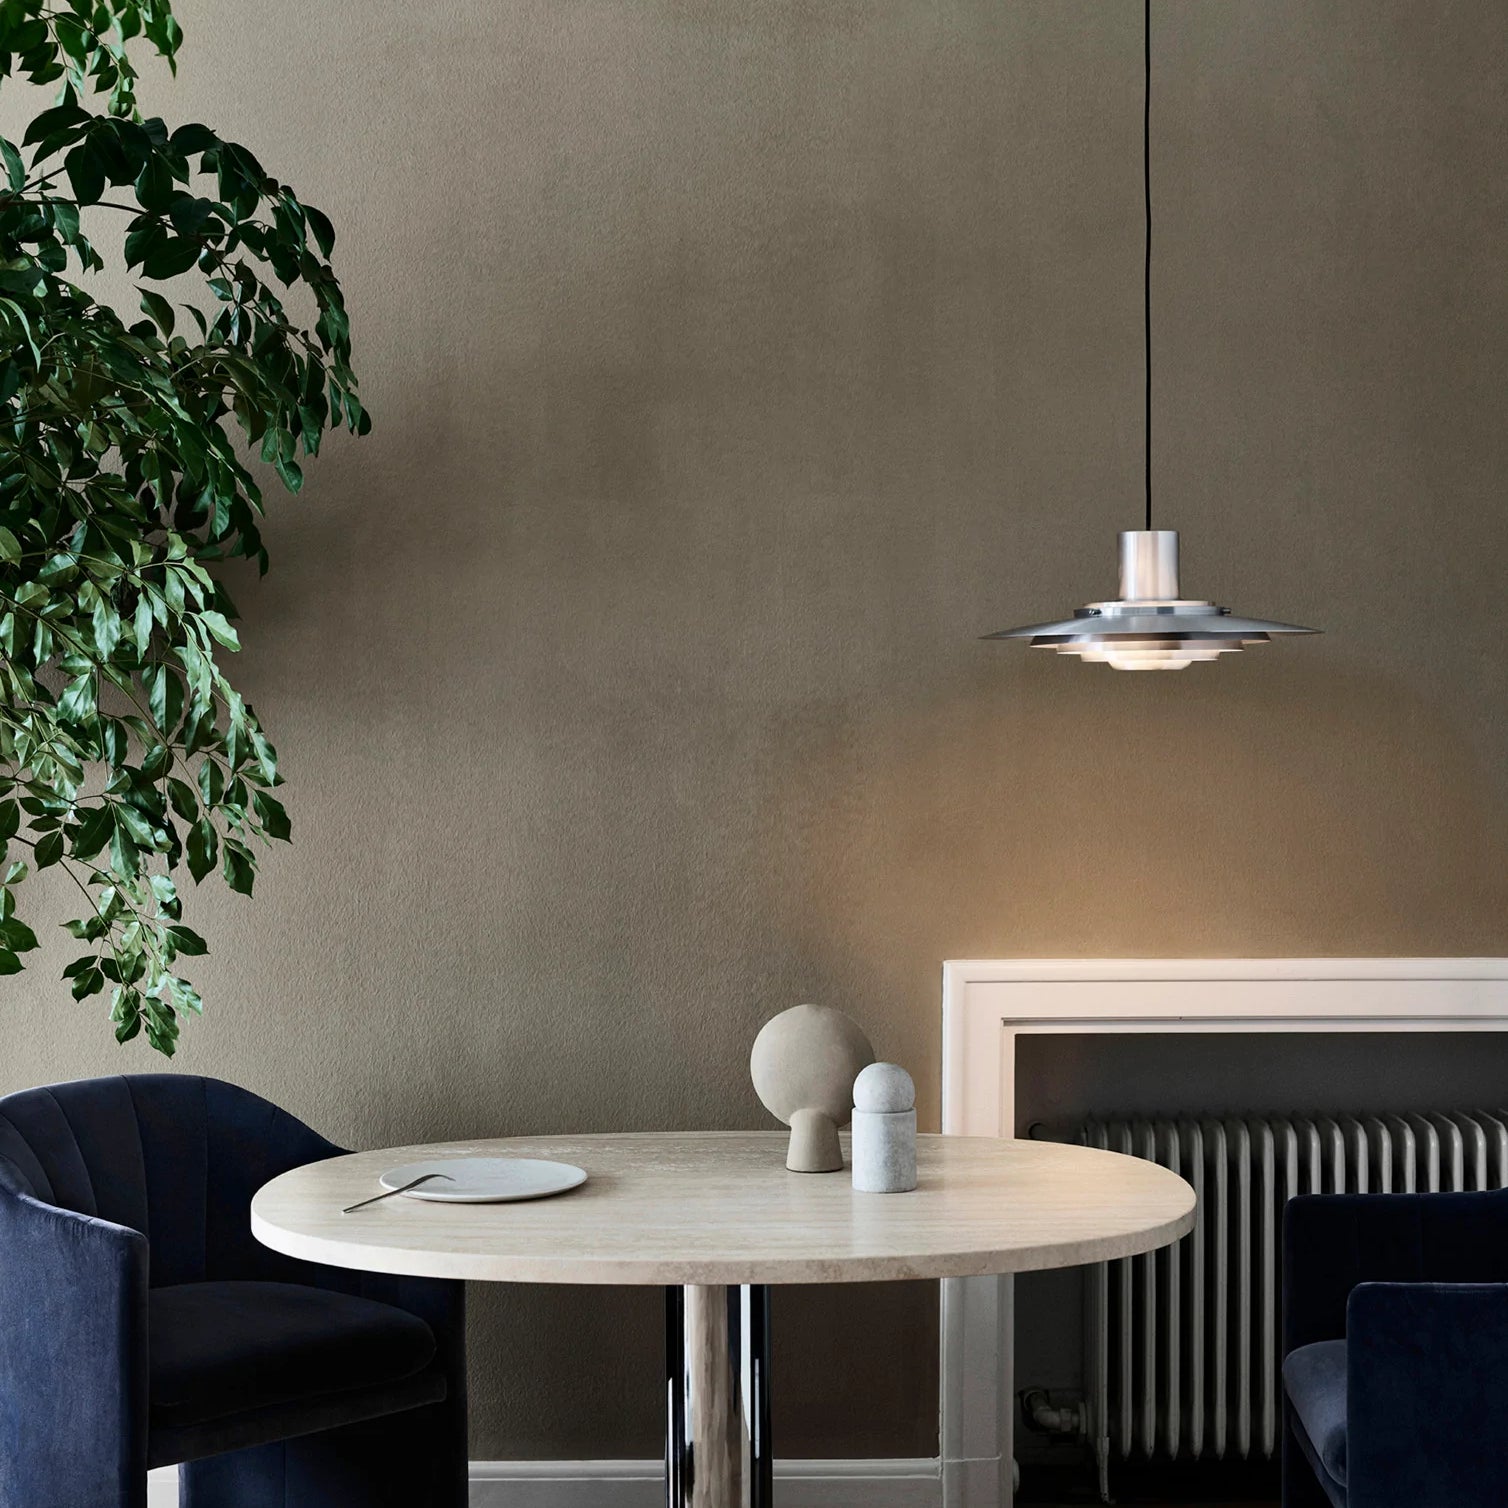 The P376 pendant lamp is a perfect example of subtle architectural slant on design. Originally conceived in 1963 by Danish architects Kastholm & Fabricius and relaunched by &Tradition in 2019, the P376 features five concentric shades that create gradations of curves towards the middle of the lamp to emit a soft, diffused light. The discrete placement of the shades and the silky aluminium finish culminate in a cohesive expression that’s both iconic and enthralling. 